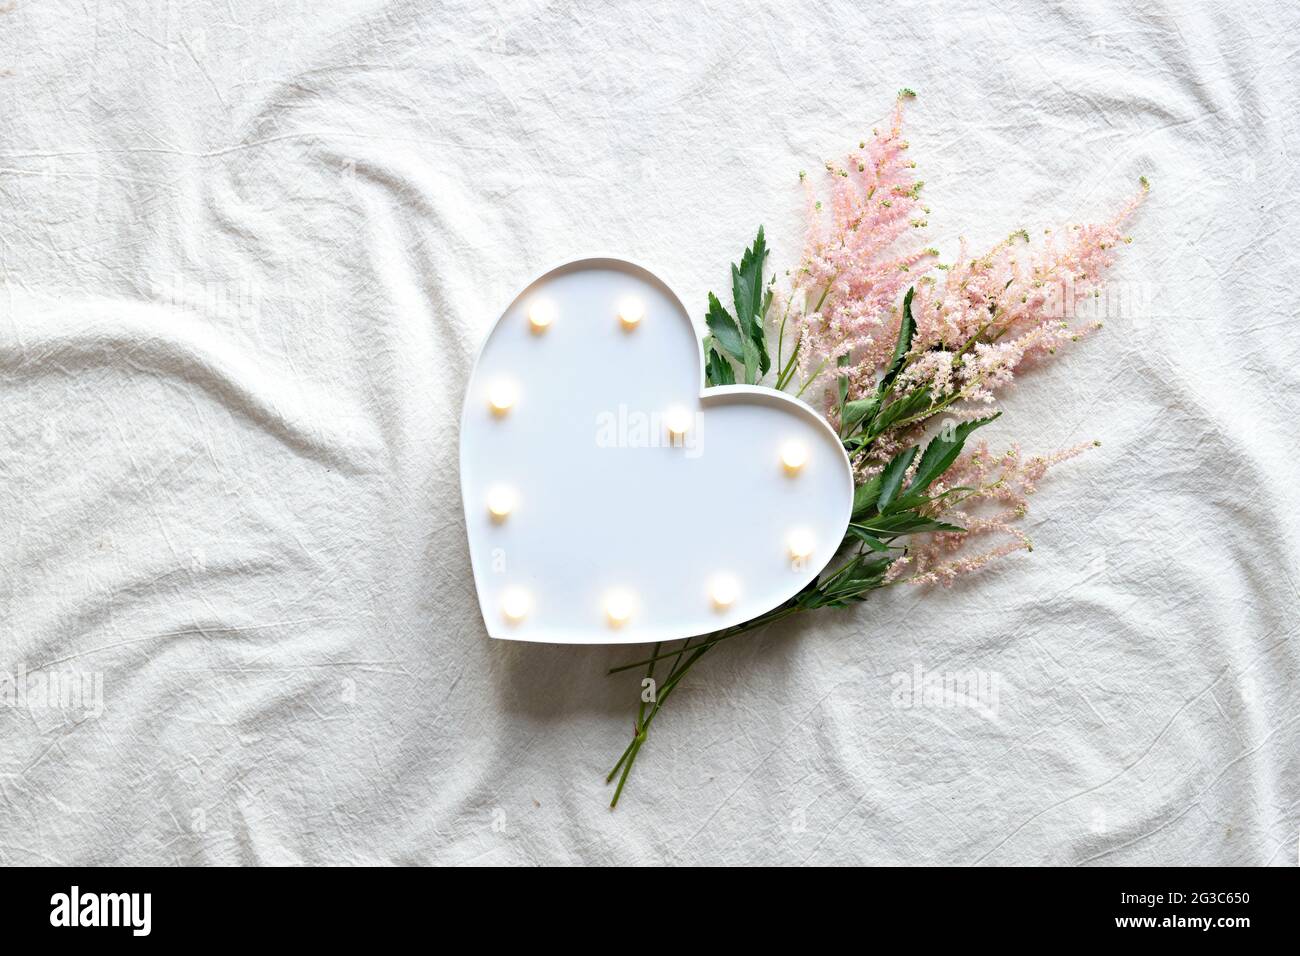 Heart lightbox and wild flowers . Flat lay on off white textile. Natural materials, environment concious, low impact, eco friendly lifestyle concept. Stock Photo